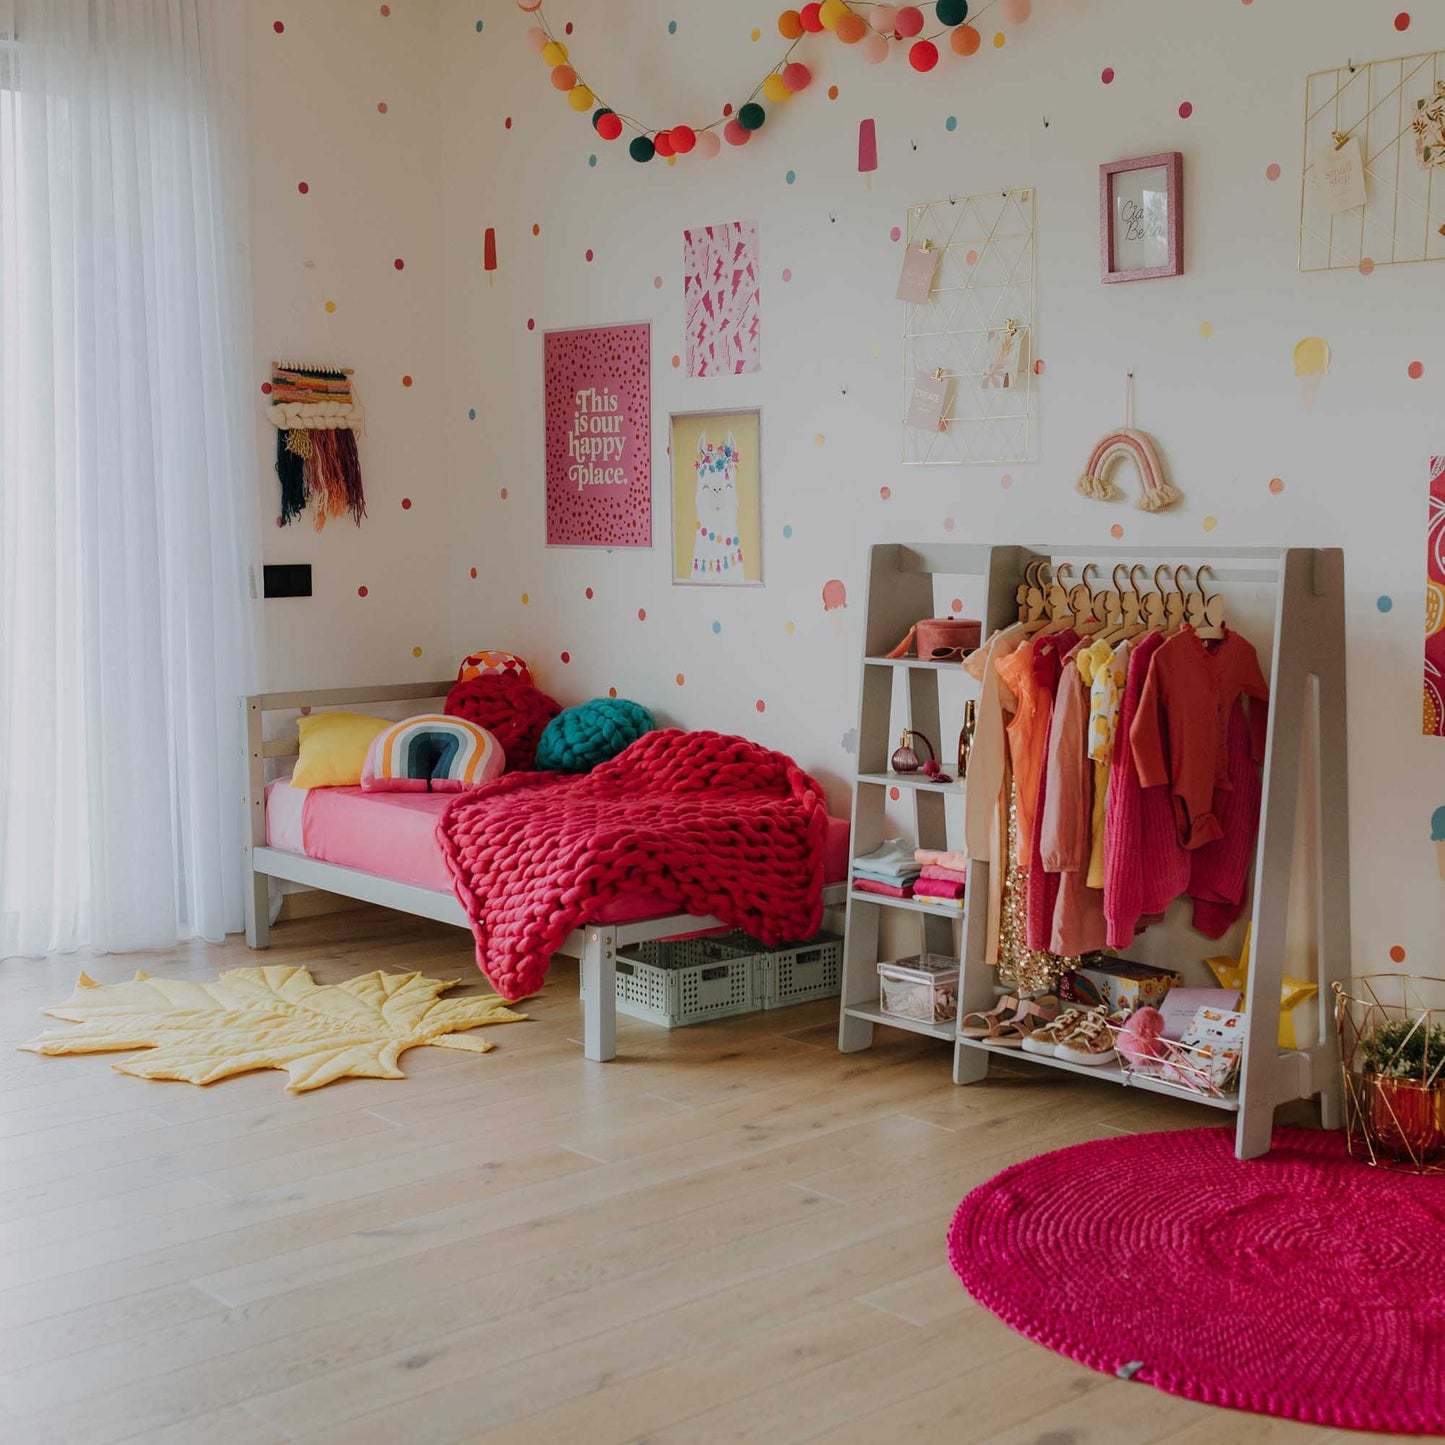 A Sweet Home From Wood kids' bed on legs with a horizontal rail headboard in a girl's room, complete with a bedside table.